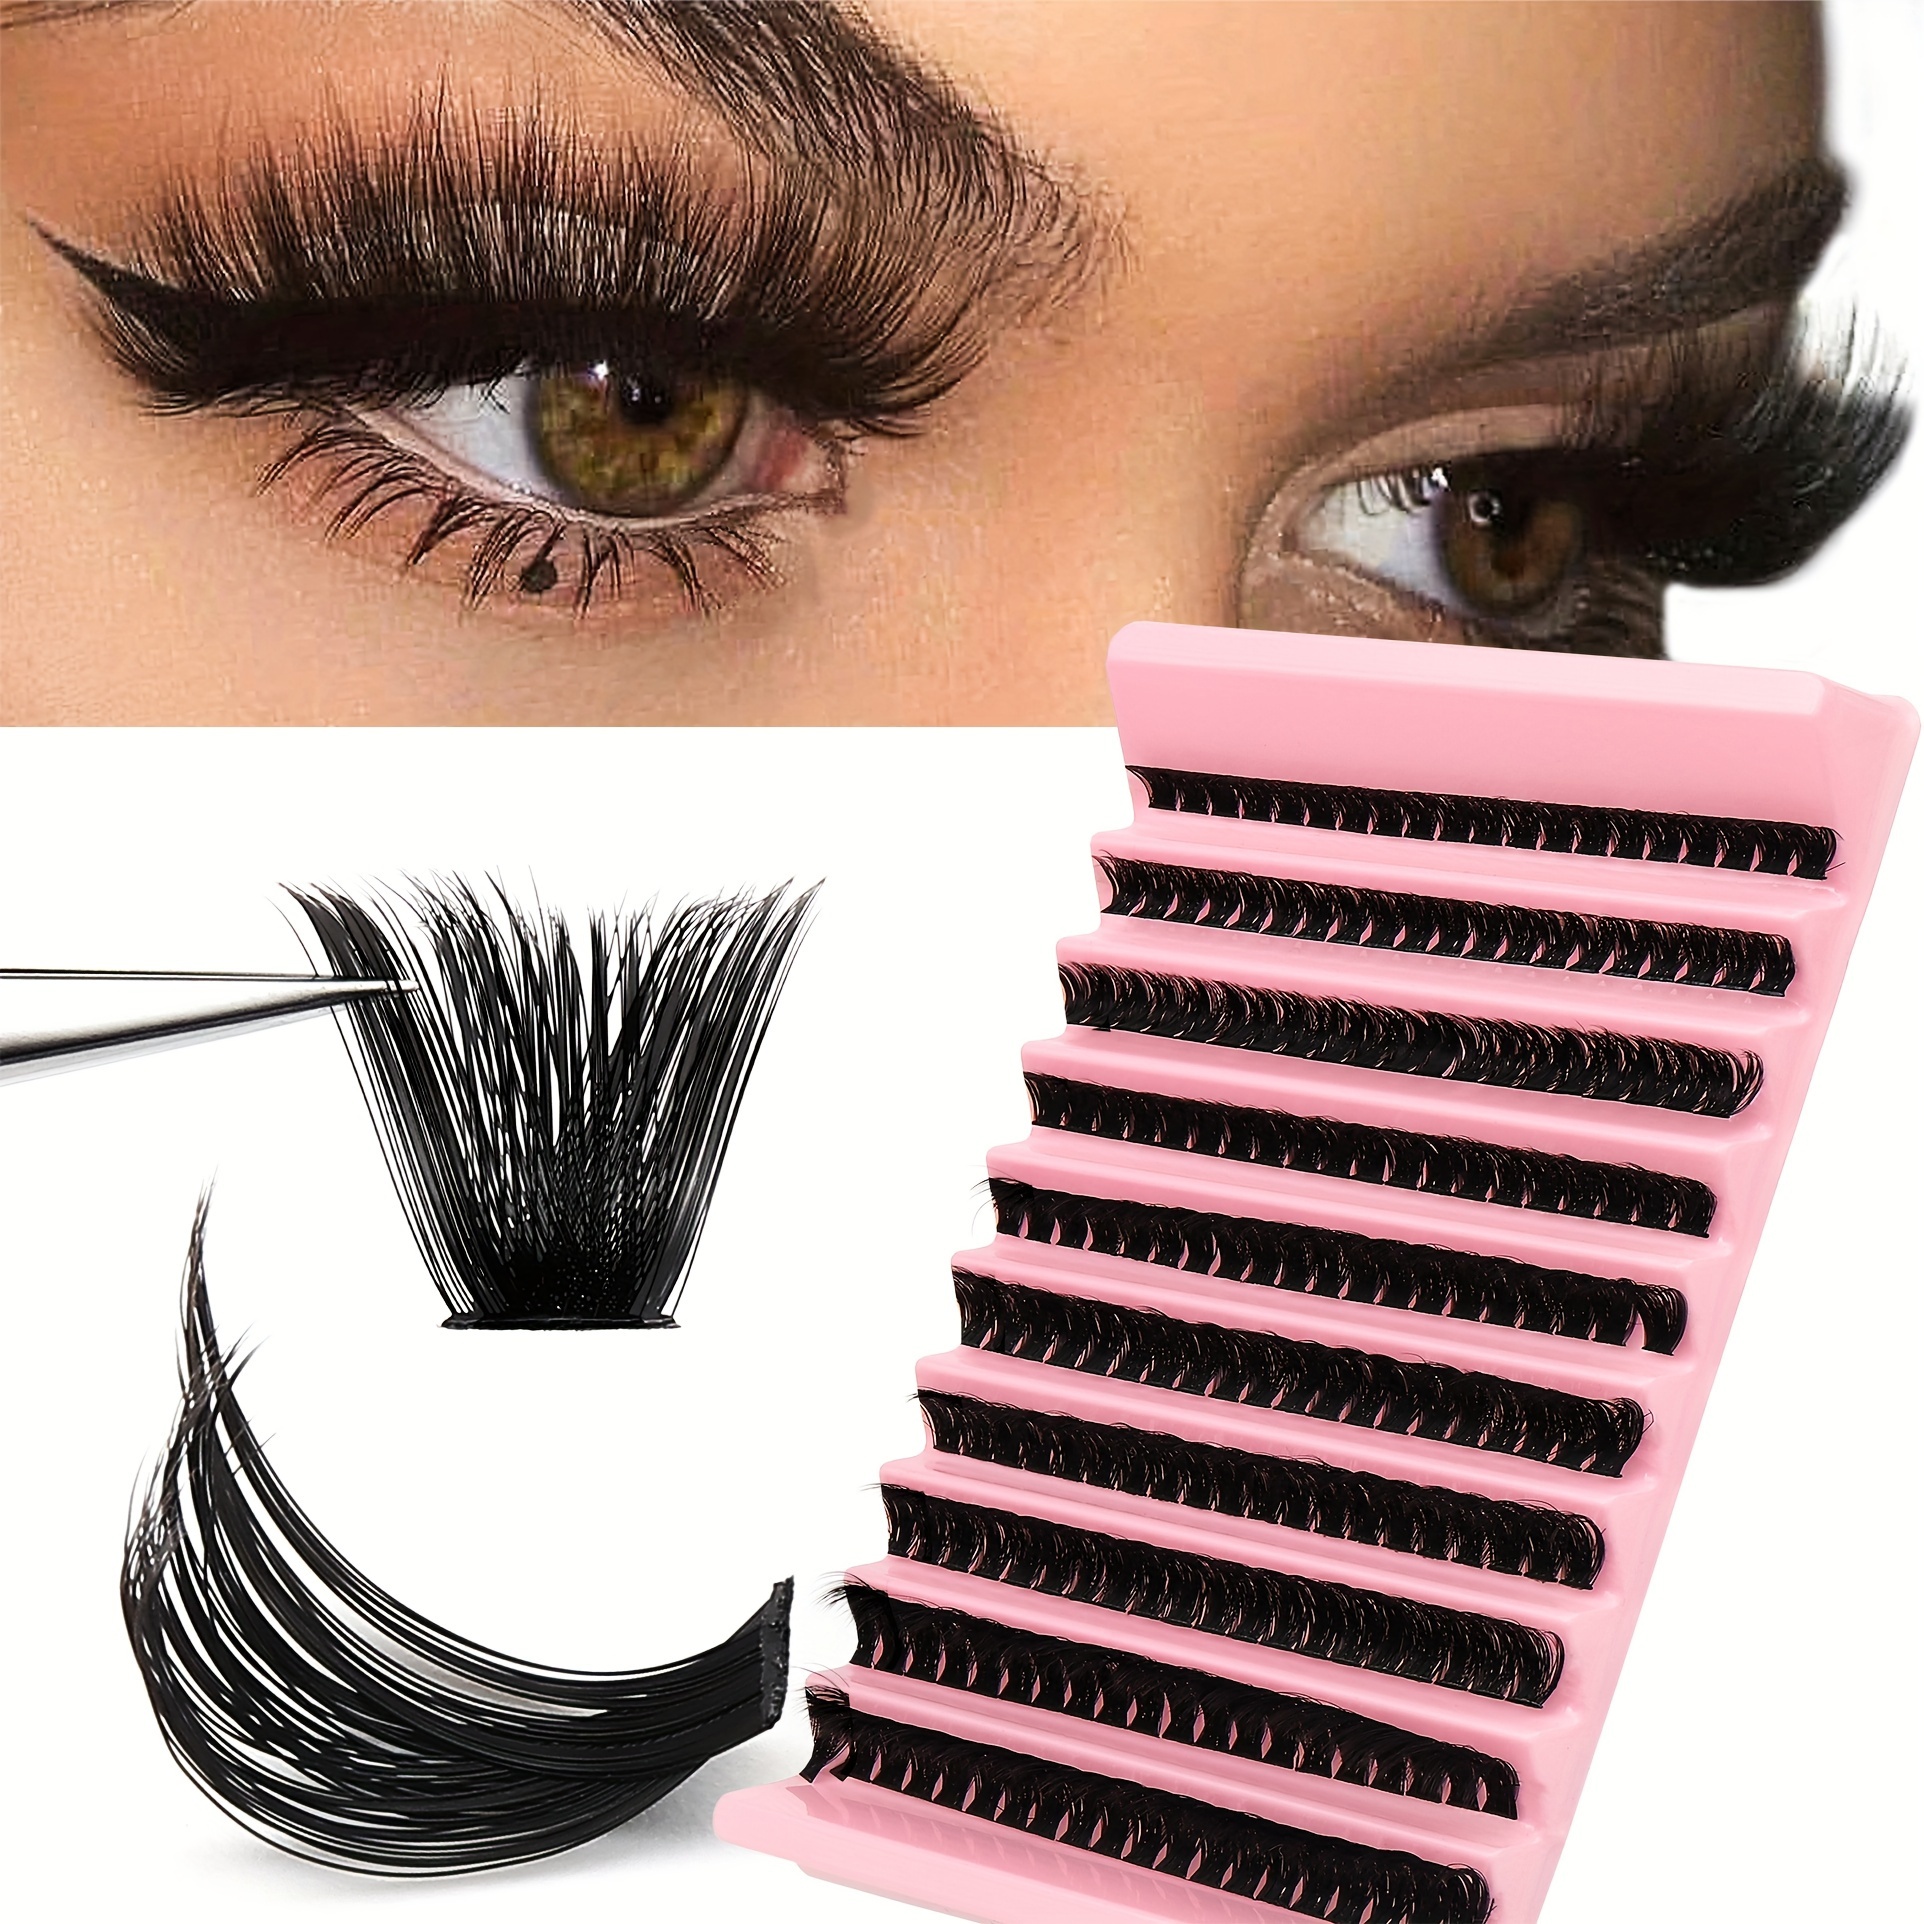 

200pcs D Fluffy Cluster False Eyelashes Set, Mix Length 10-18mm, 0.07mm Natural To Extra Thick Individual Lashes, Self-adhesive & Reusable For Beginners